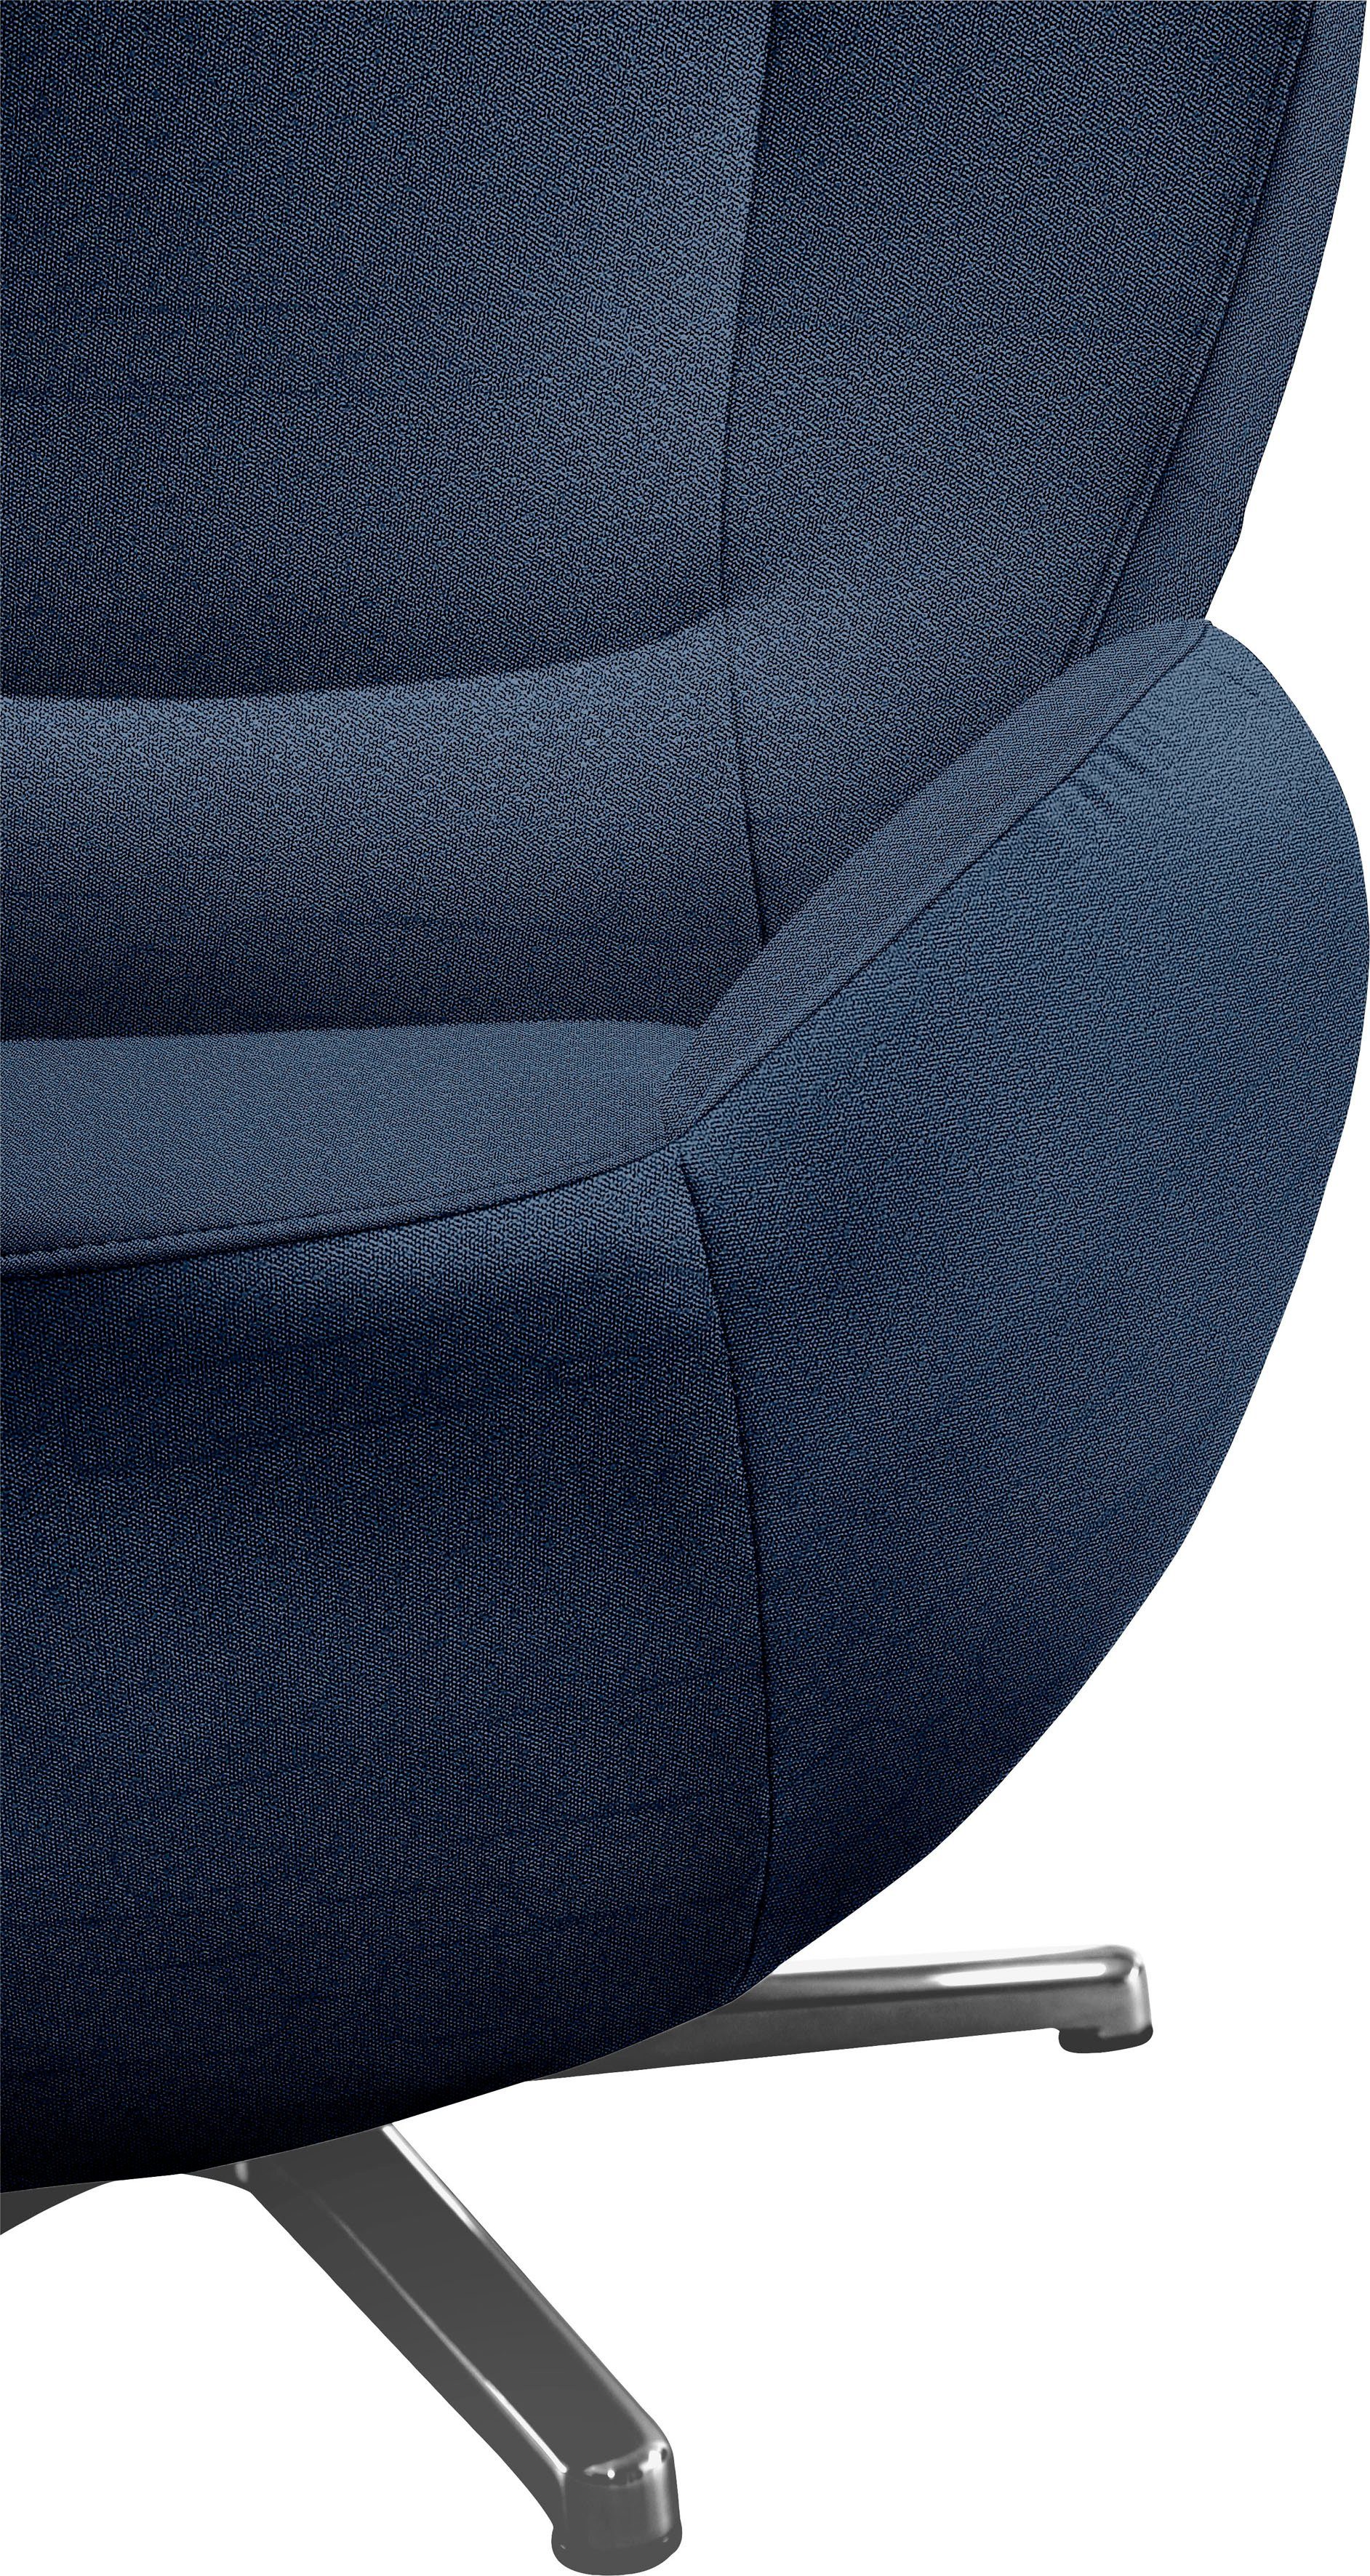 TOM TAILOR Chrom Loungesessel Metall-Drehfuß HOME in TOM mit PURE